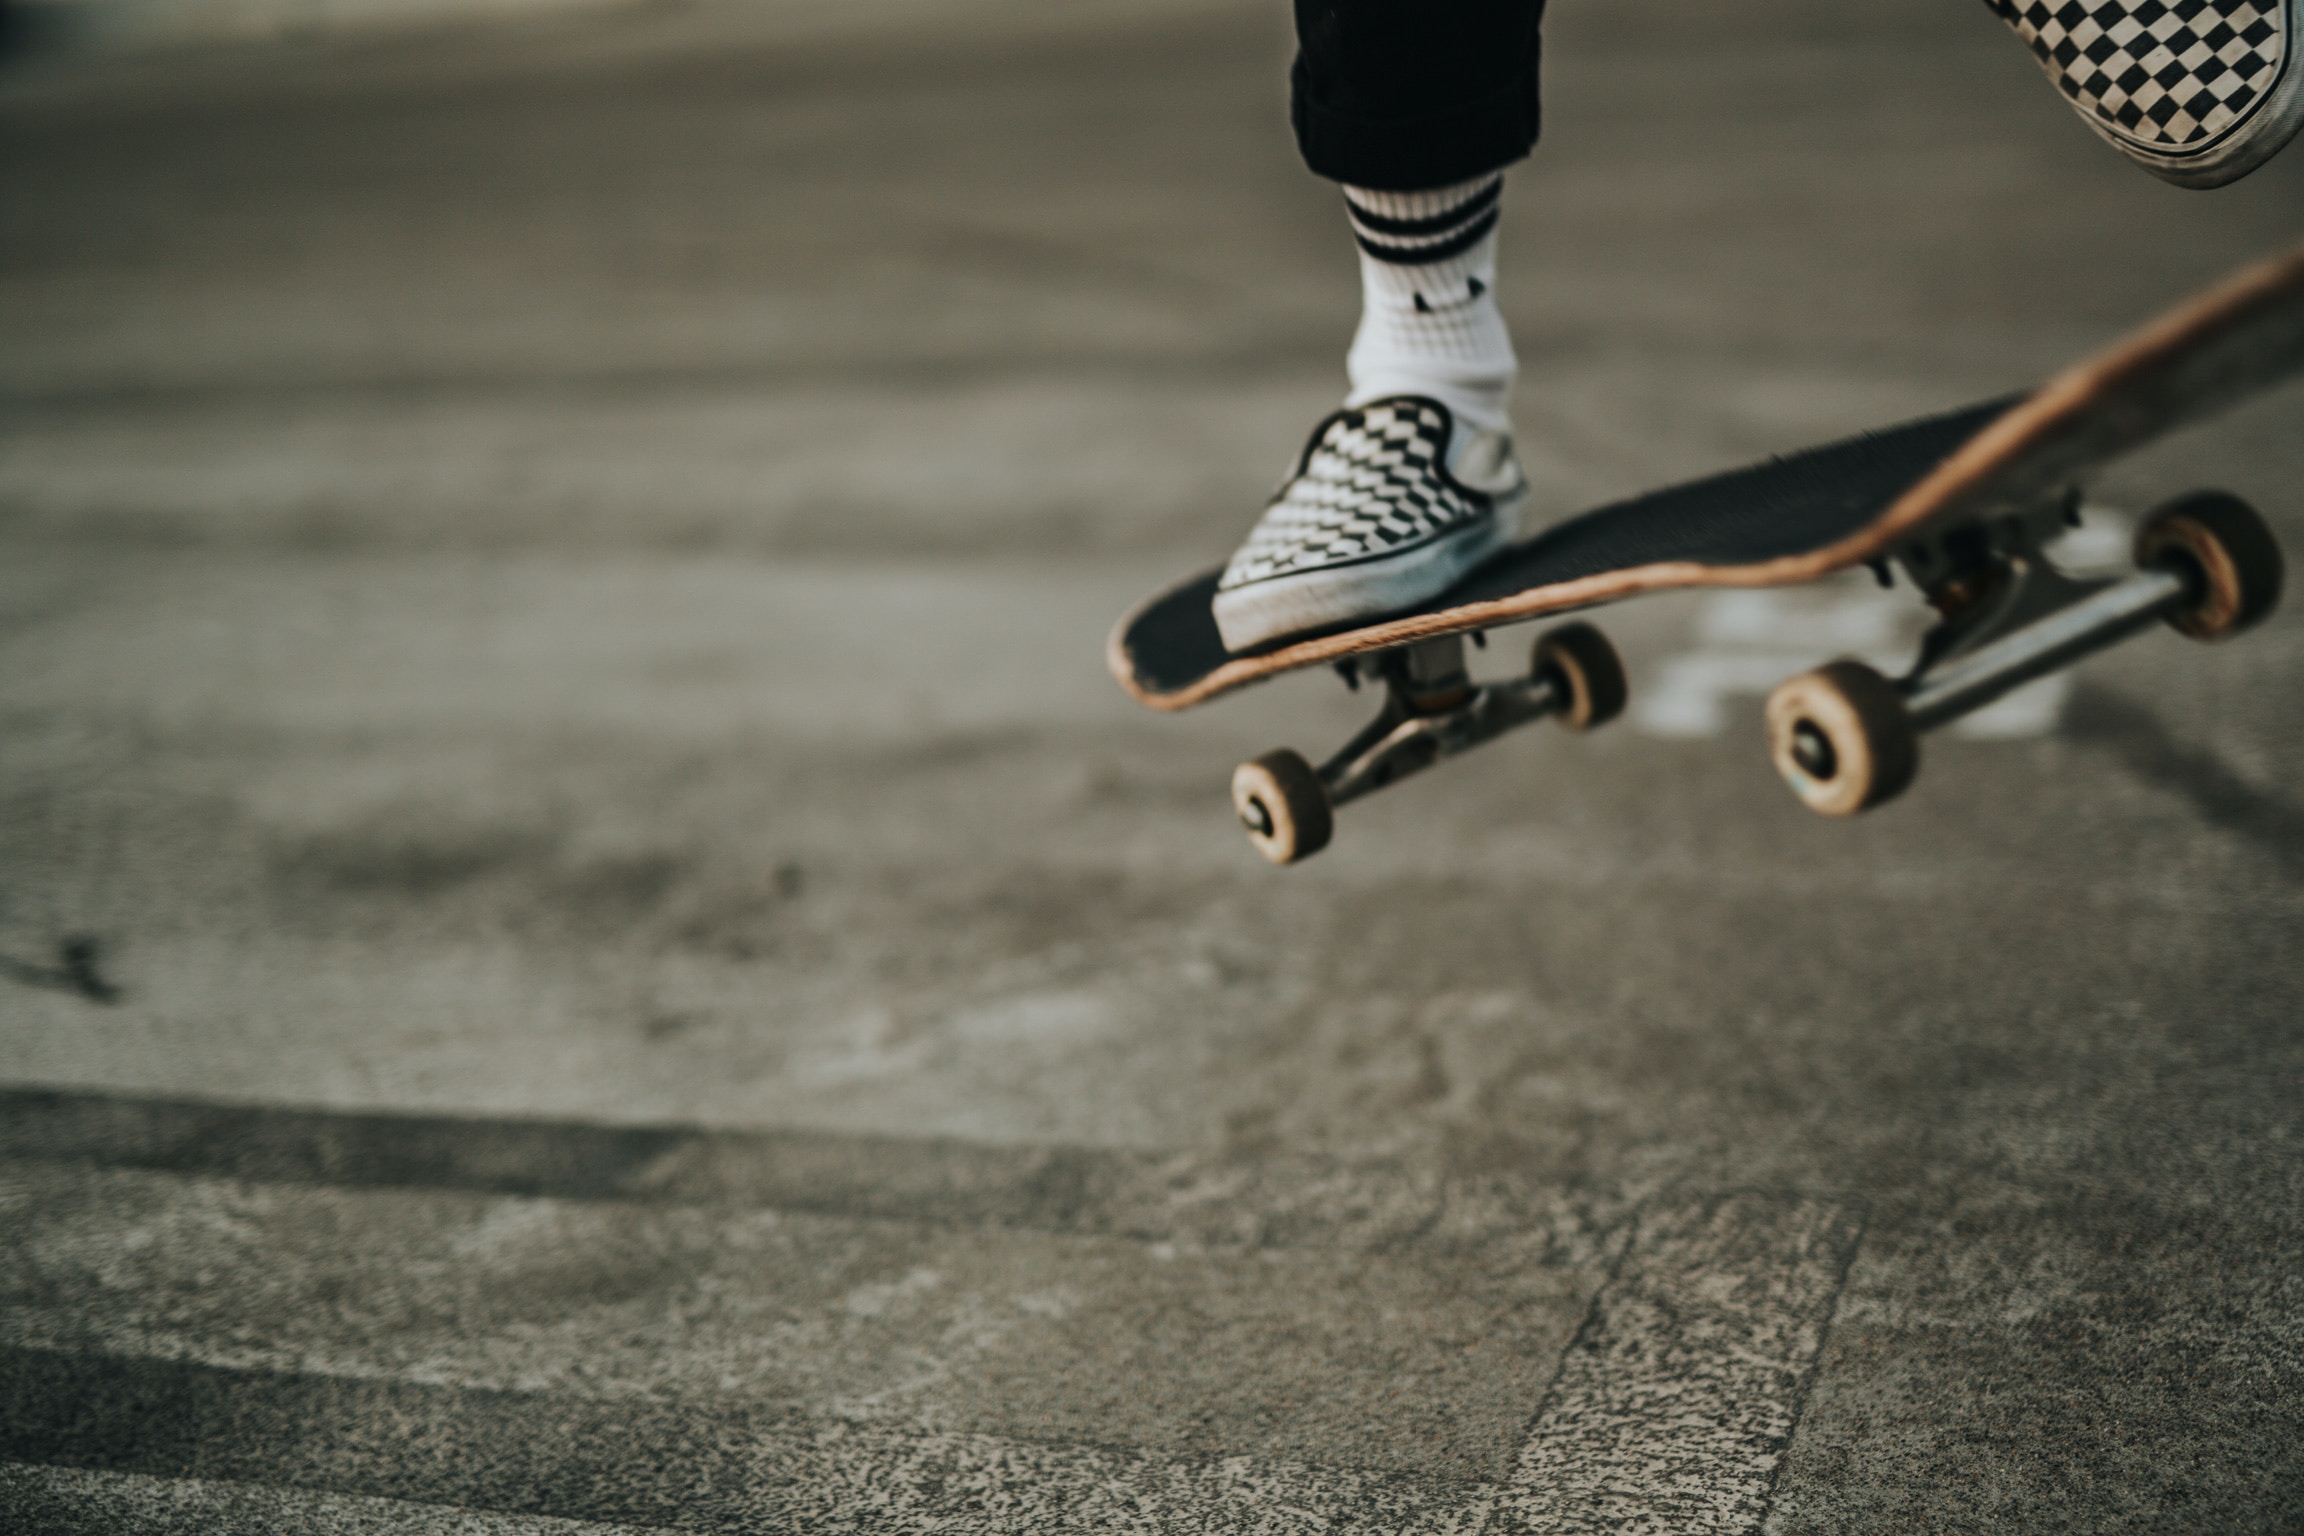 What Are The Key Steps To Learn Skateboard Flip Tricks?